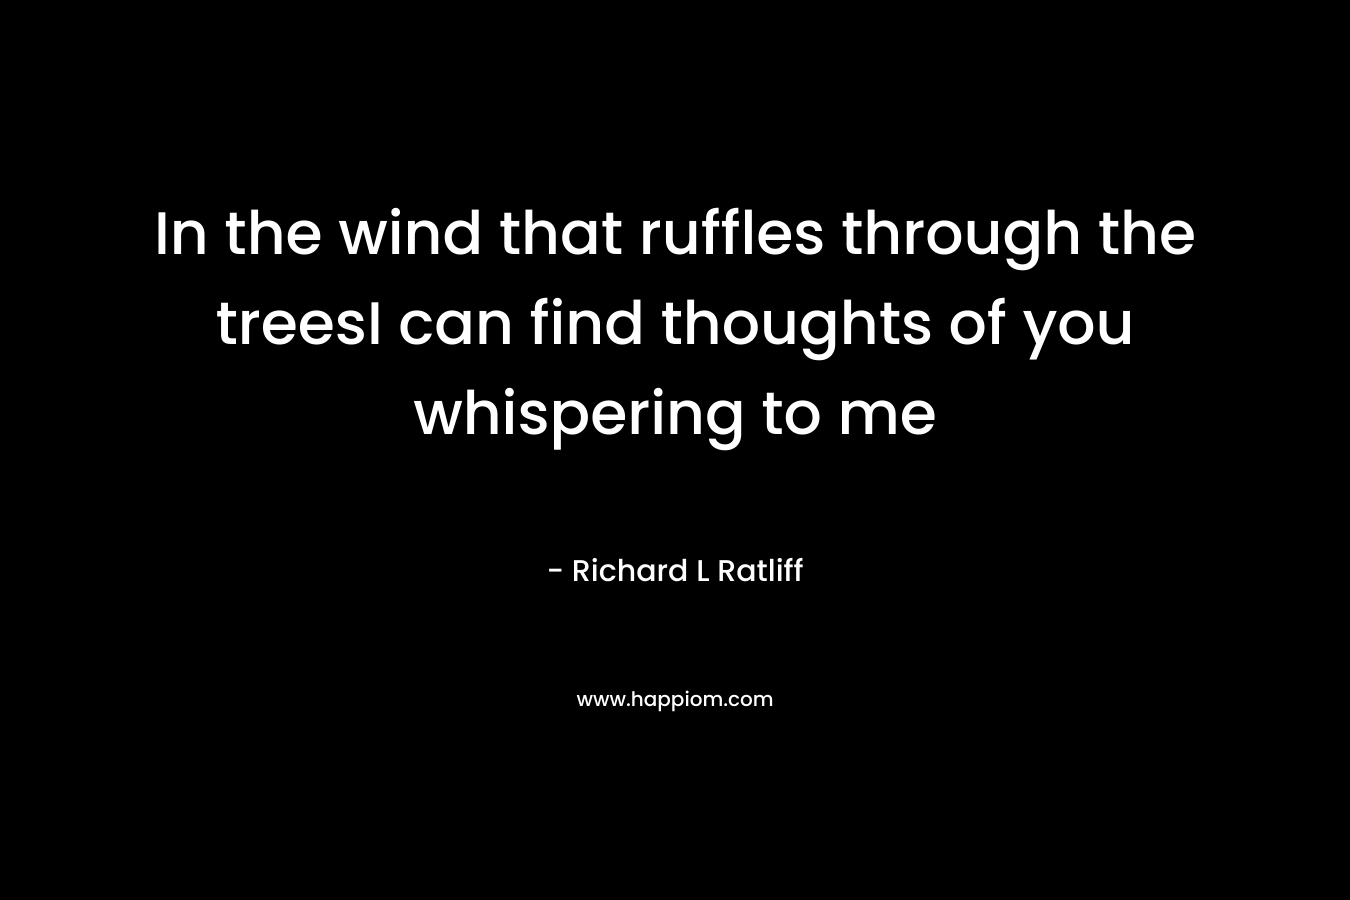 In the wind that ruffles through the treesI can find thoughts of you whispering to me